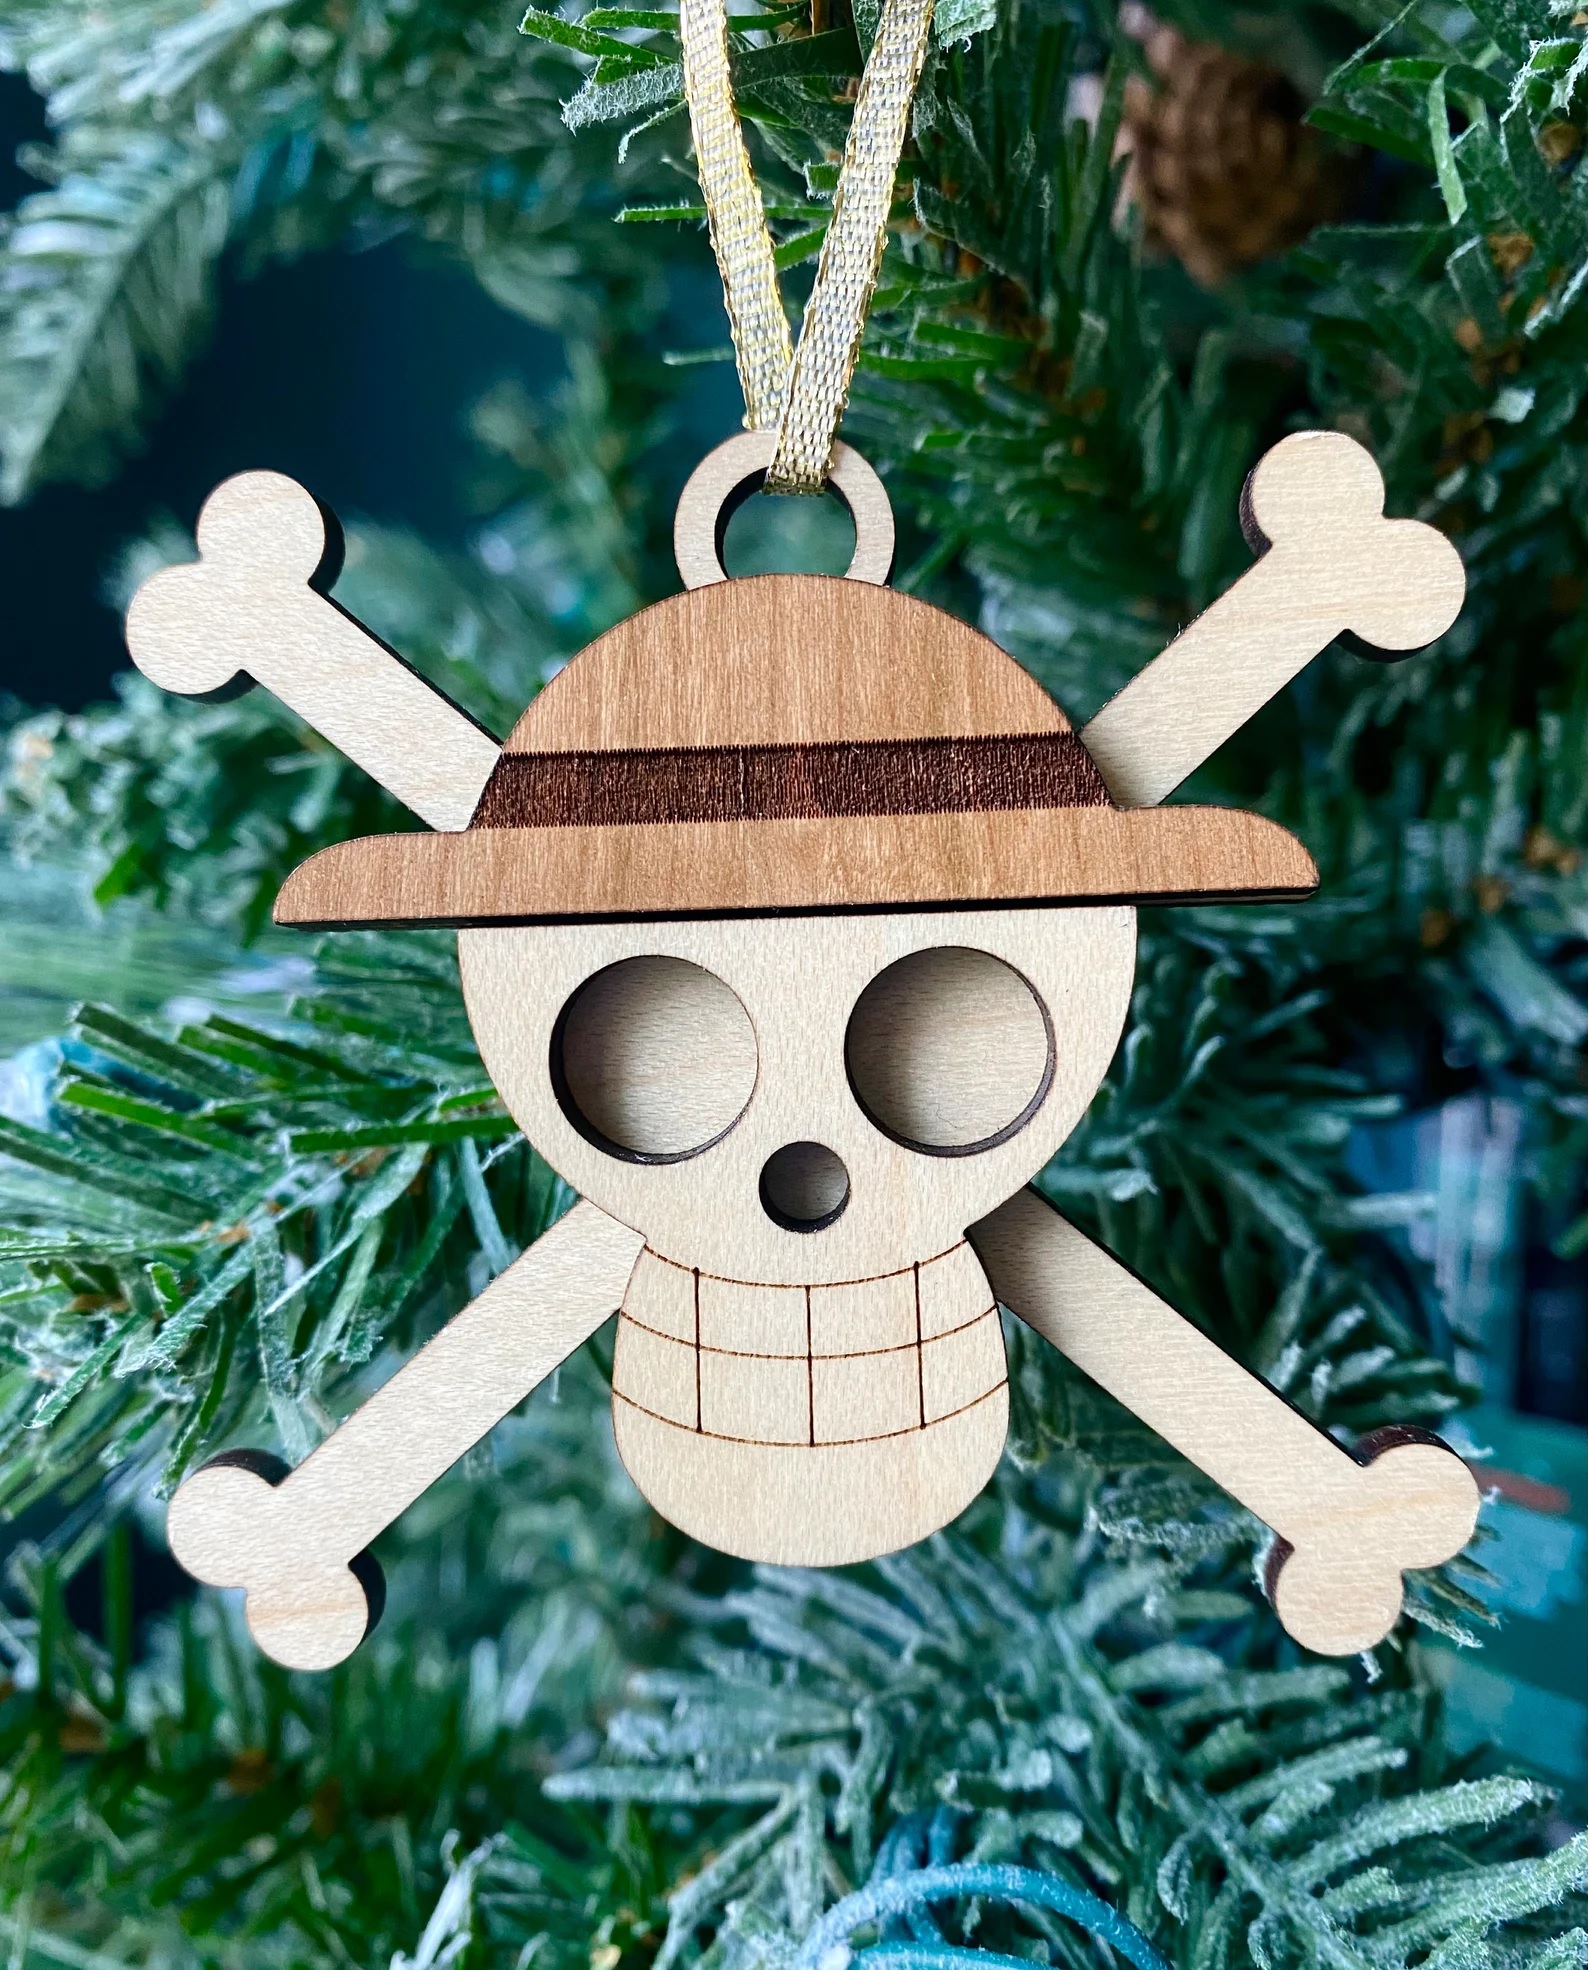 An ornament shaped like the skull and crossbones from One Piece. It's wearing a straw hat